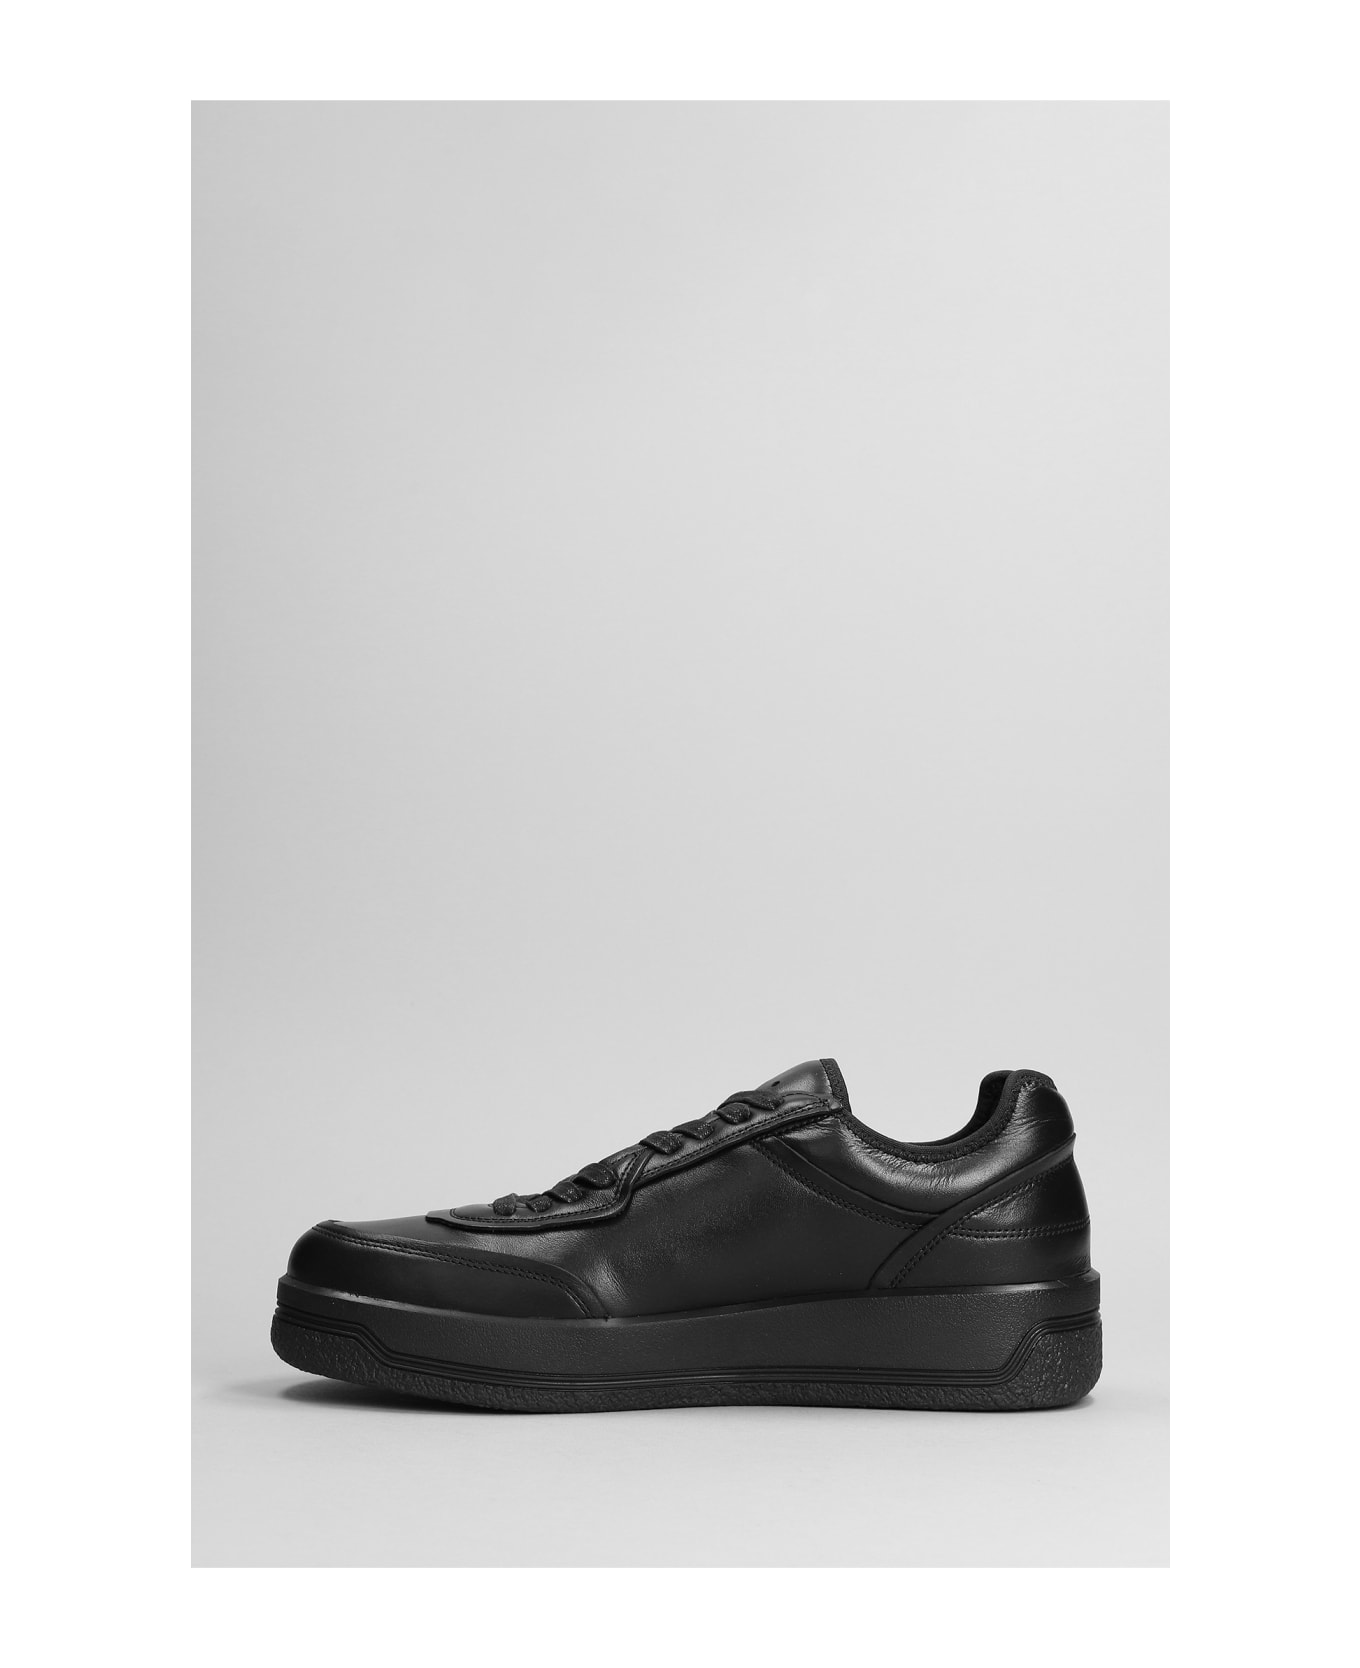 OAMC Cosmos Sneakers In Black Leather